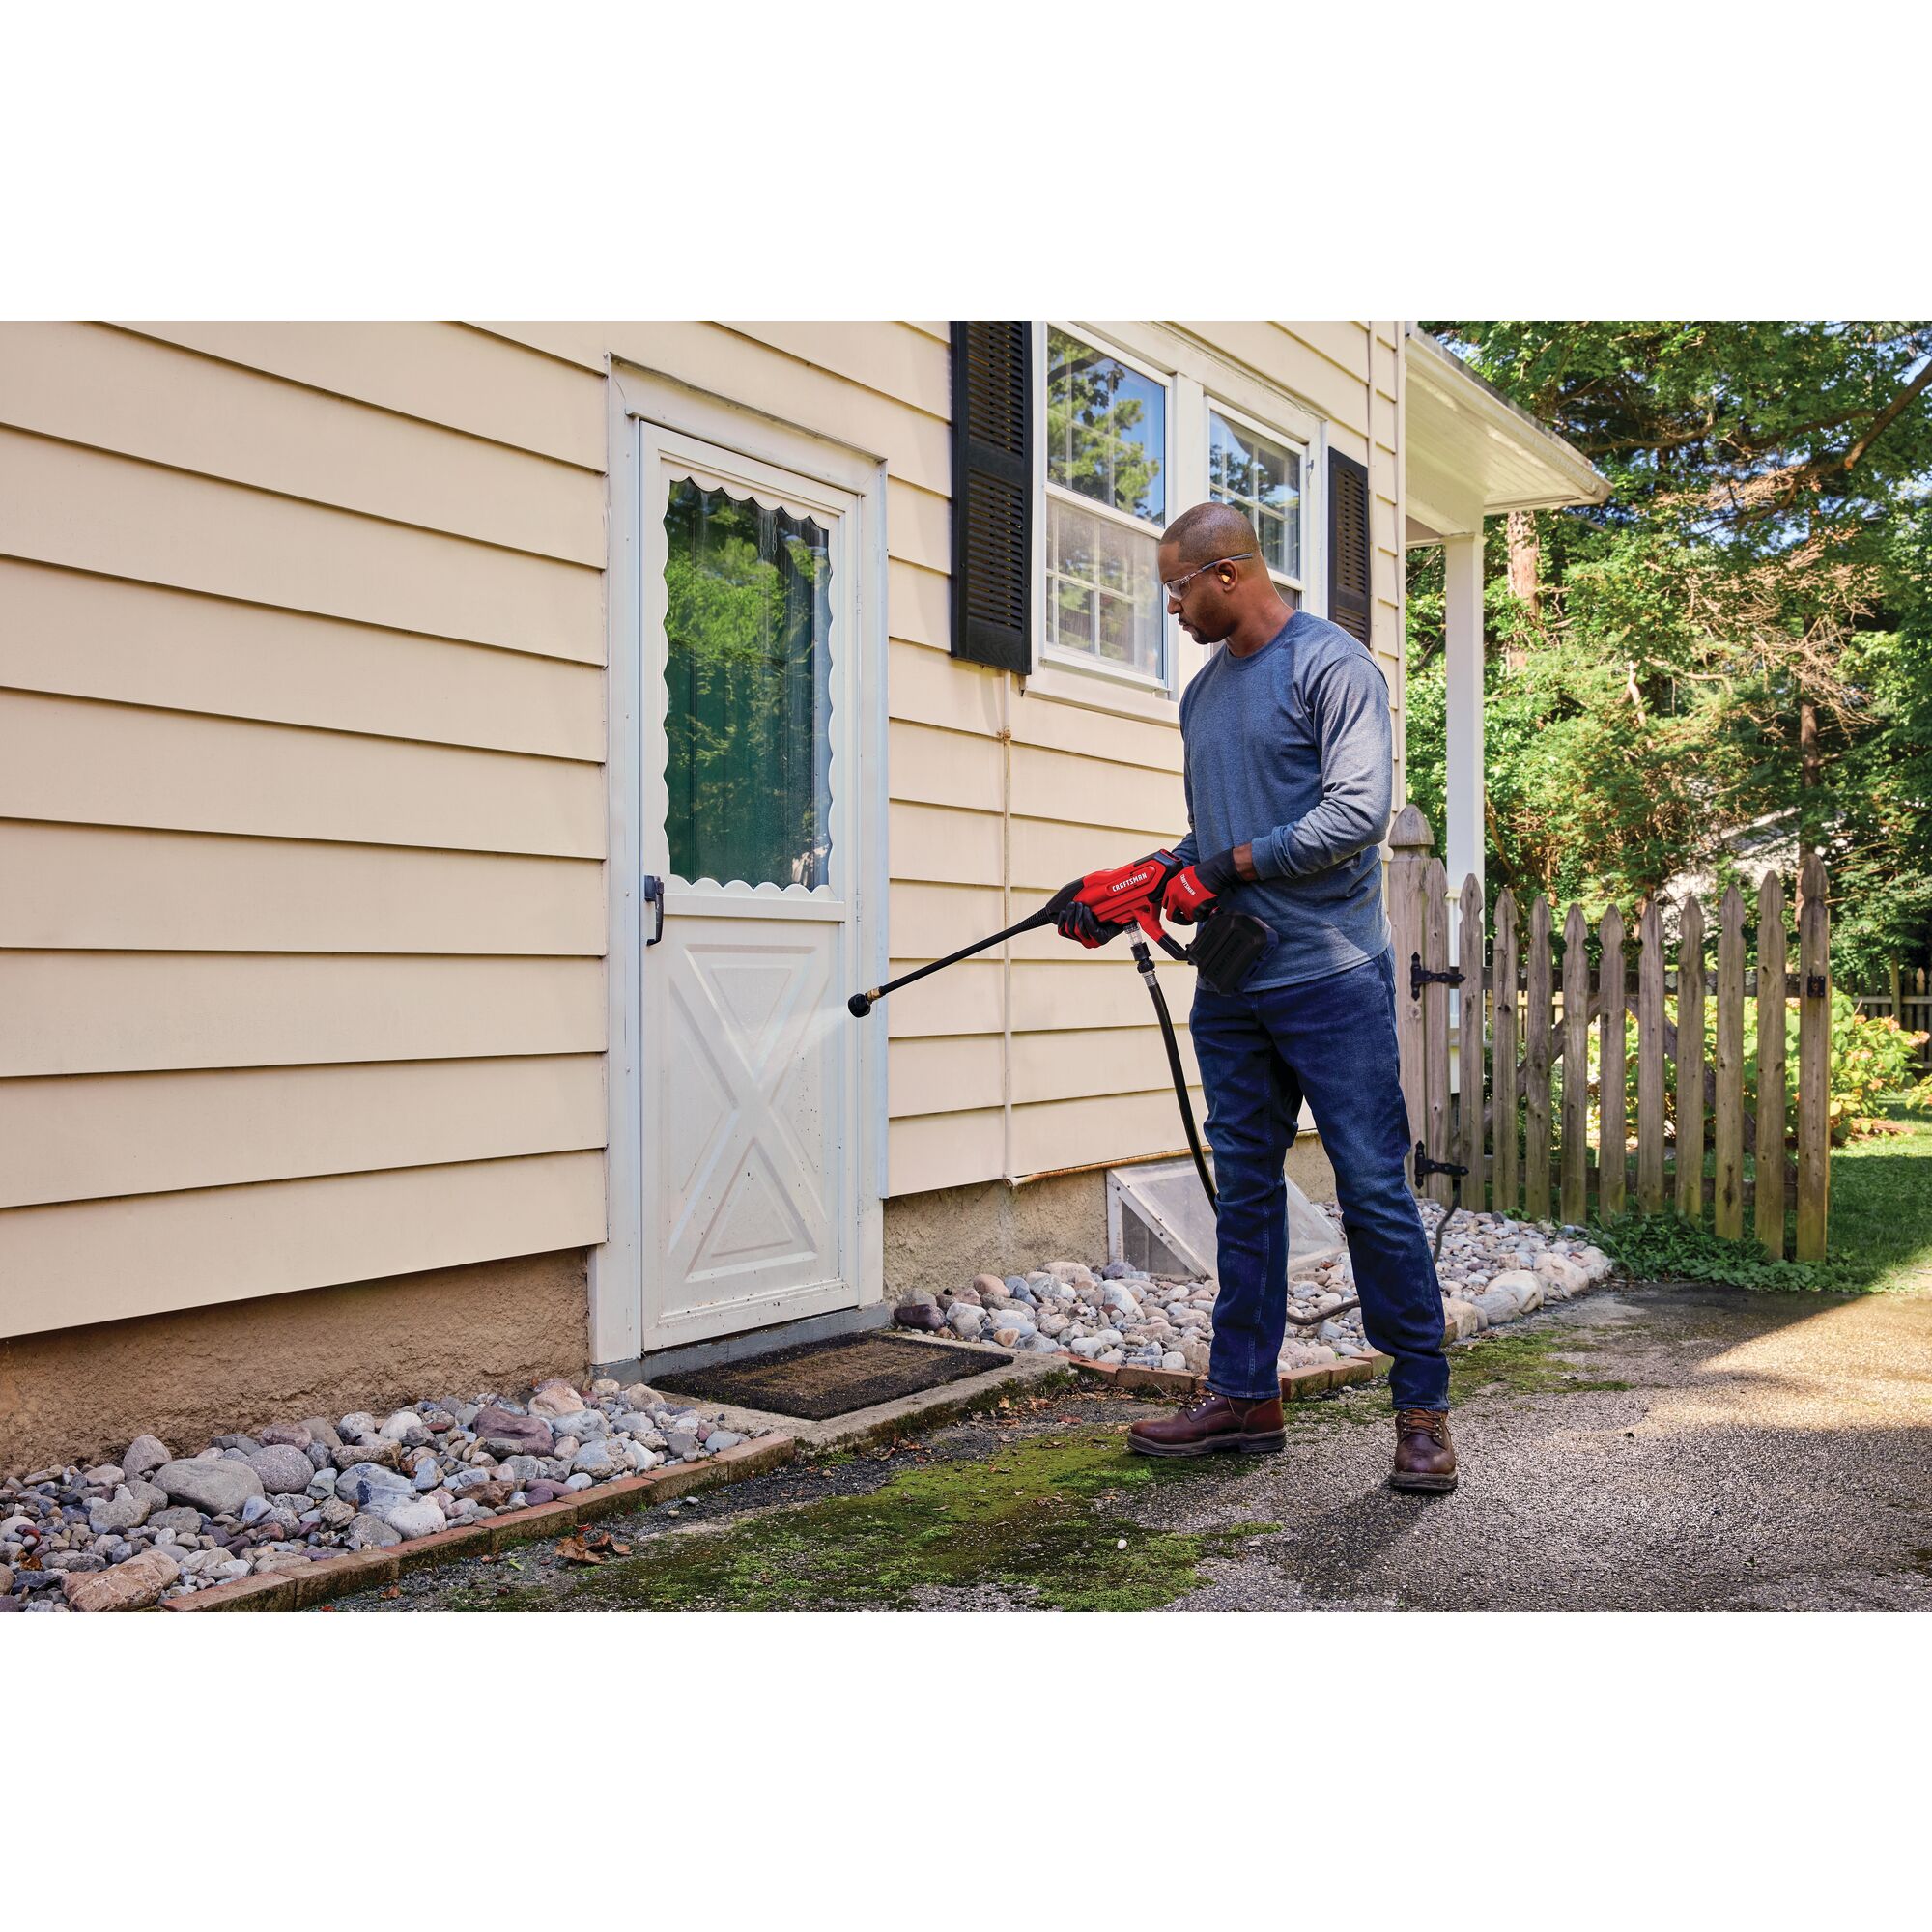 20 volt cordless 350 max P S I power cleaner kit being used by a person to clean a door outside.